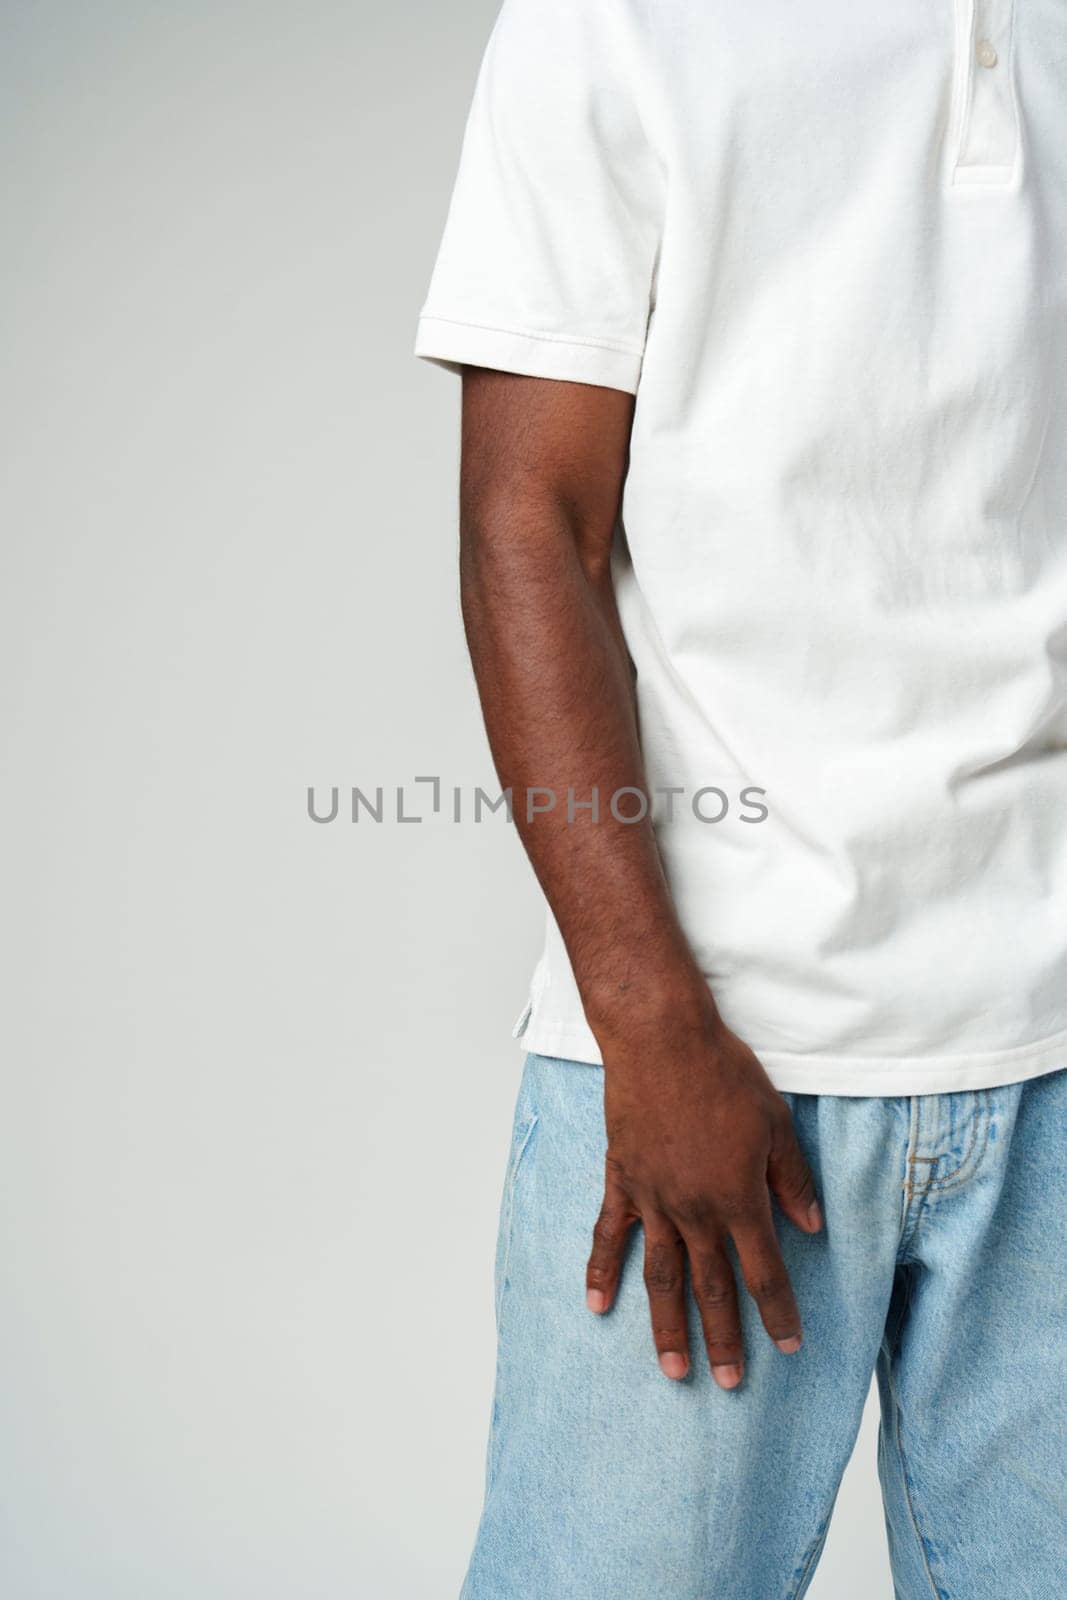 Casual Attire Fashion Close-Up Featuring Denim Jeans and White T-Shirt by Fabrikasimf